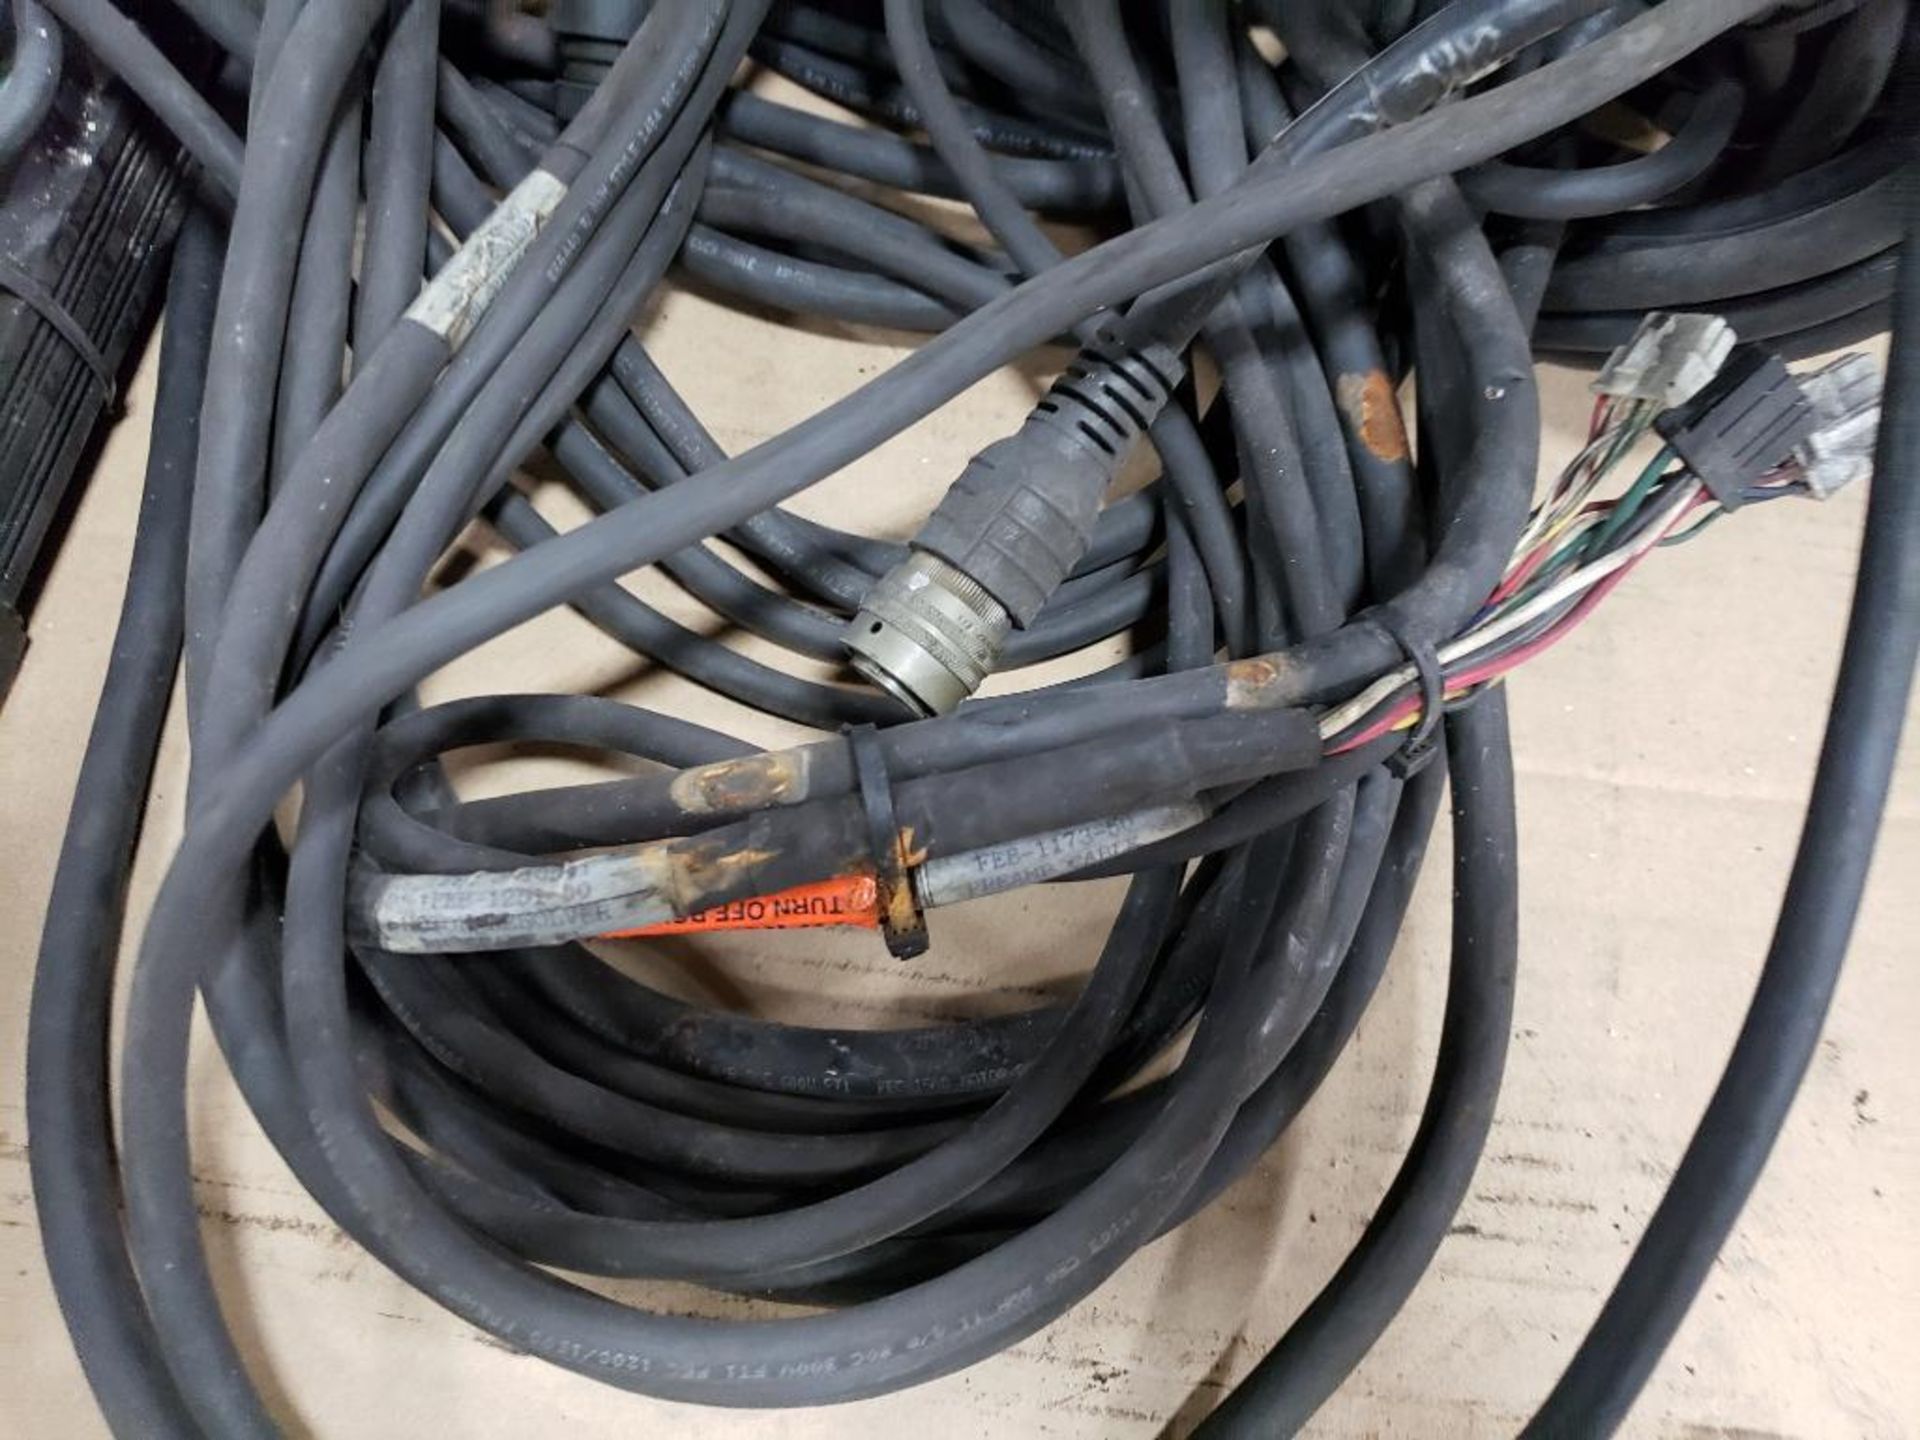 Qty 4 - FEC motorized nut runners NFT-202RM3-S and connection cords. 0.64Nm-Torque. - Image 16 of 24